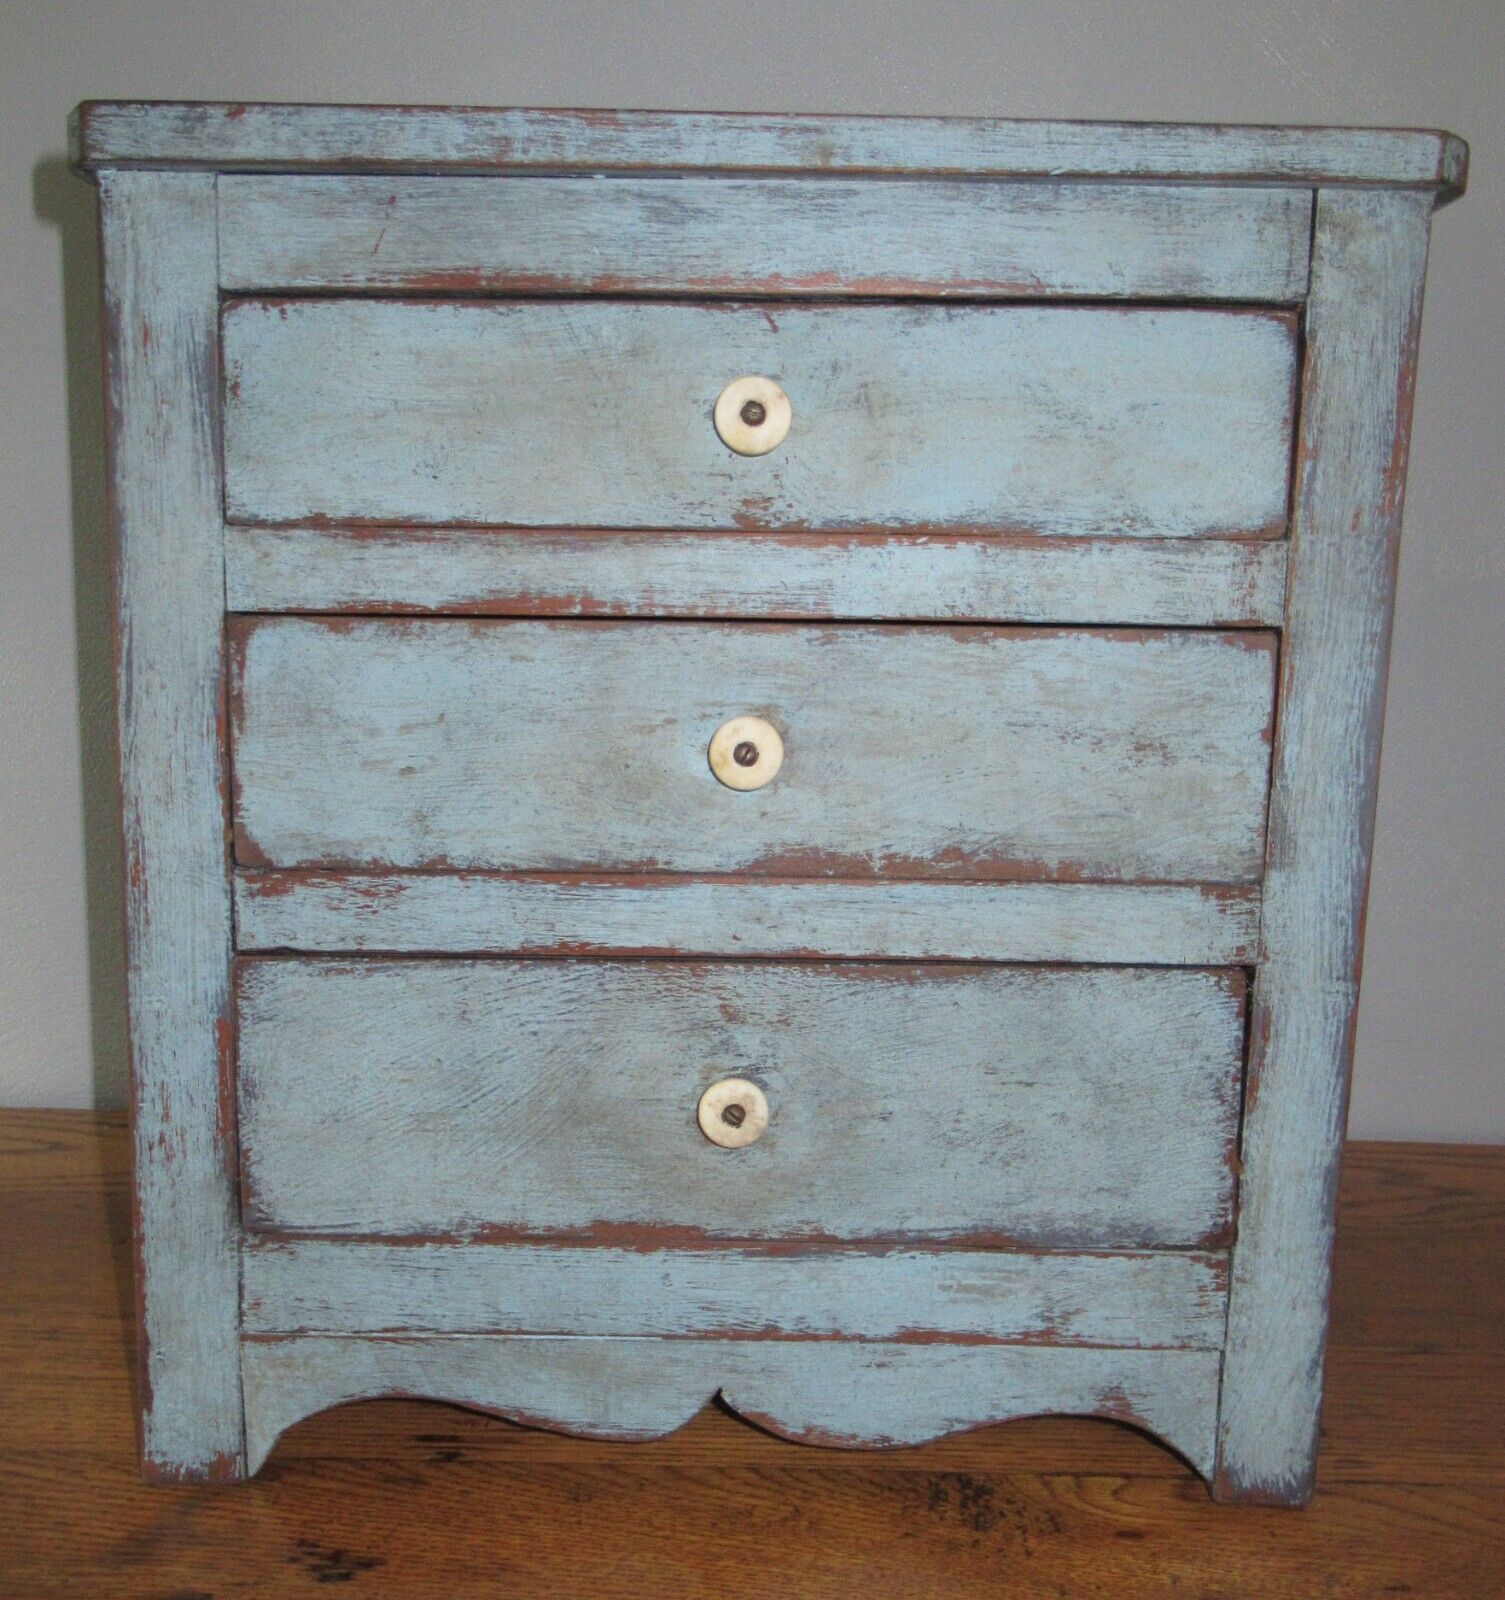 3 Drawer Wood Child's/Doll Chest-Spice Cabinet/Box/Cupboard-Blue Paint-Primitive